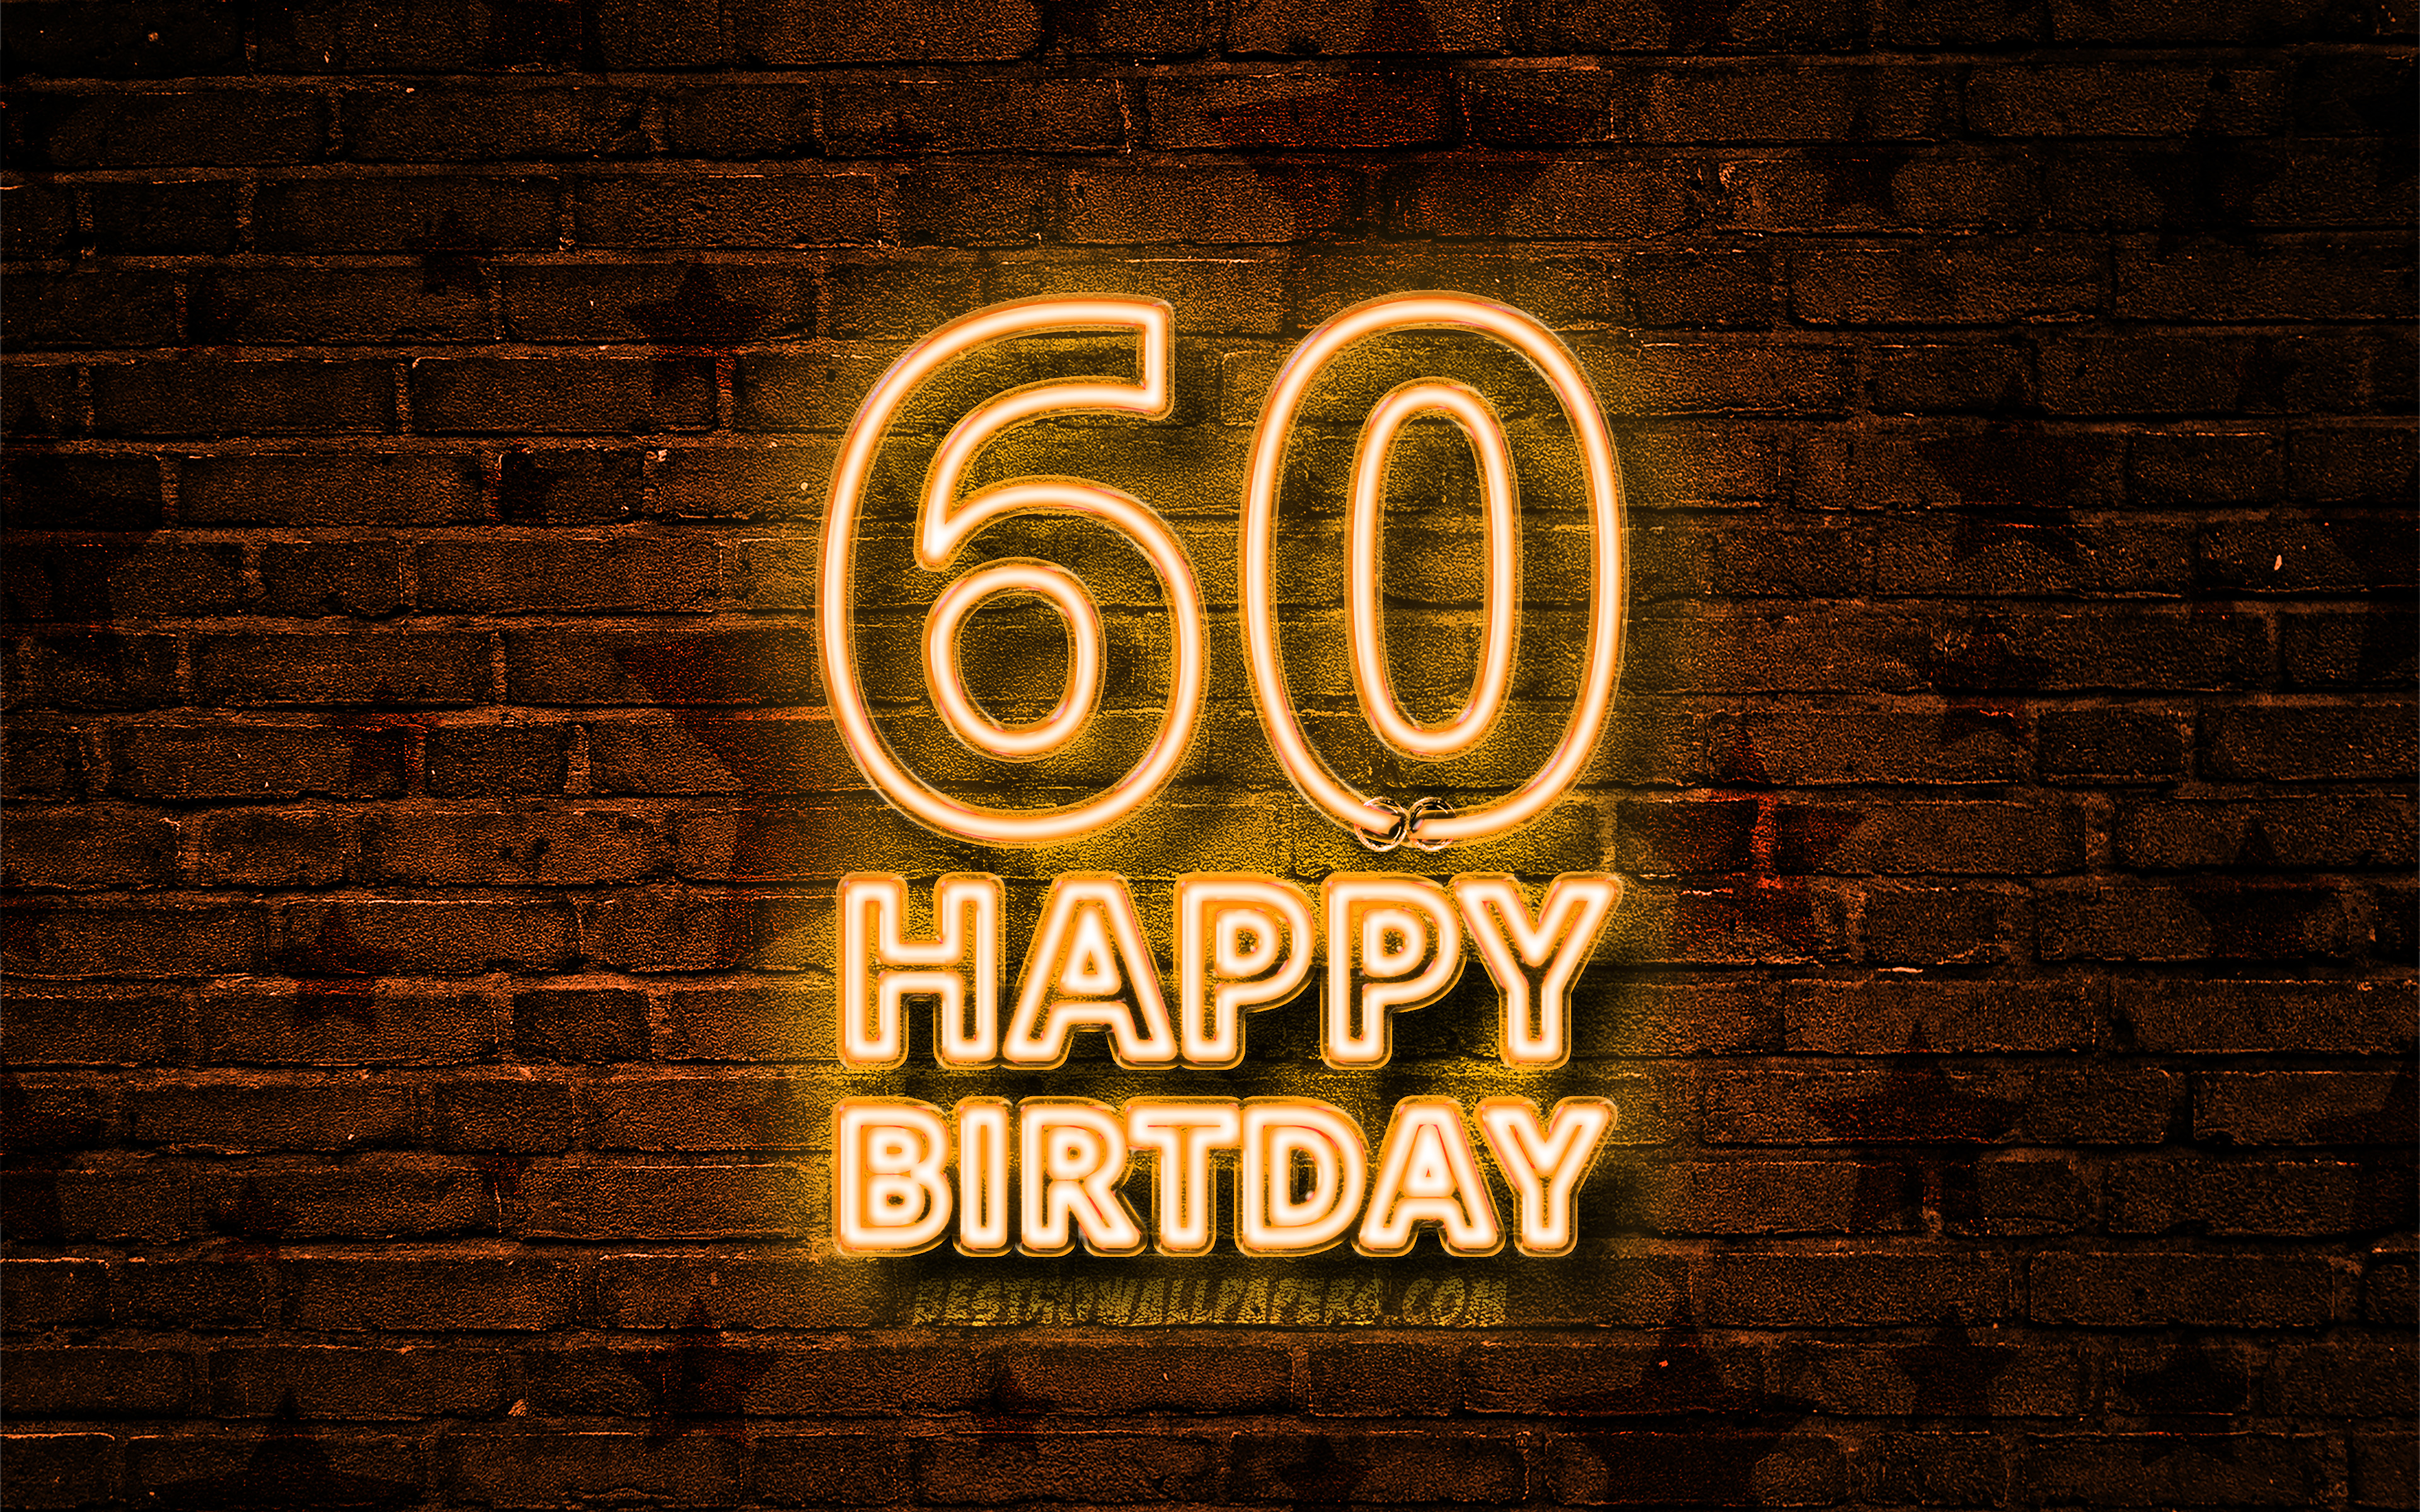 Download wallpaper Happy 60 Years Birthday, 4k, yellow neon text, 60th Birthday Party, yellow brickwall, Happy 60th birthday, Birthday concept, Birthday Party, 60th Birthday for desktop with resolution 3840x2400. High Quality HD